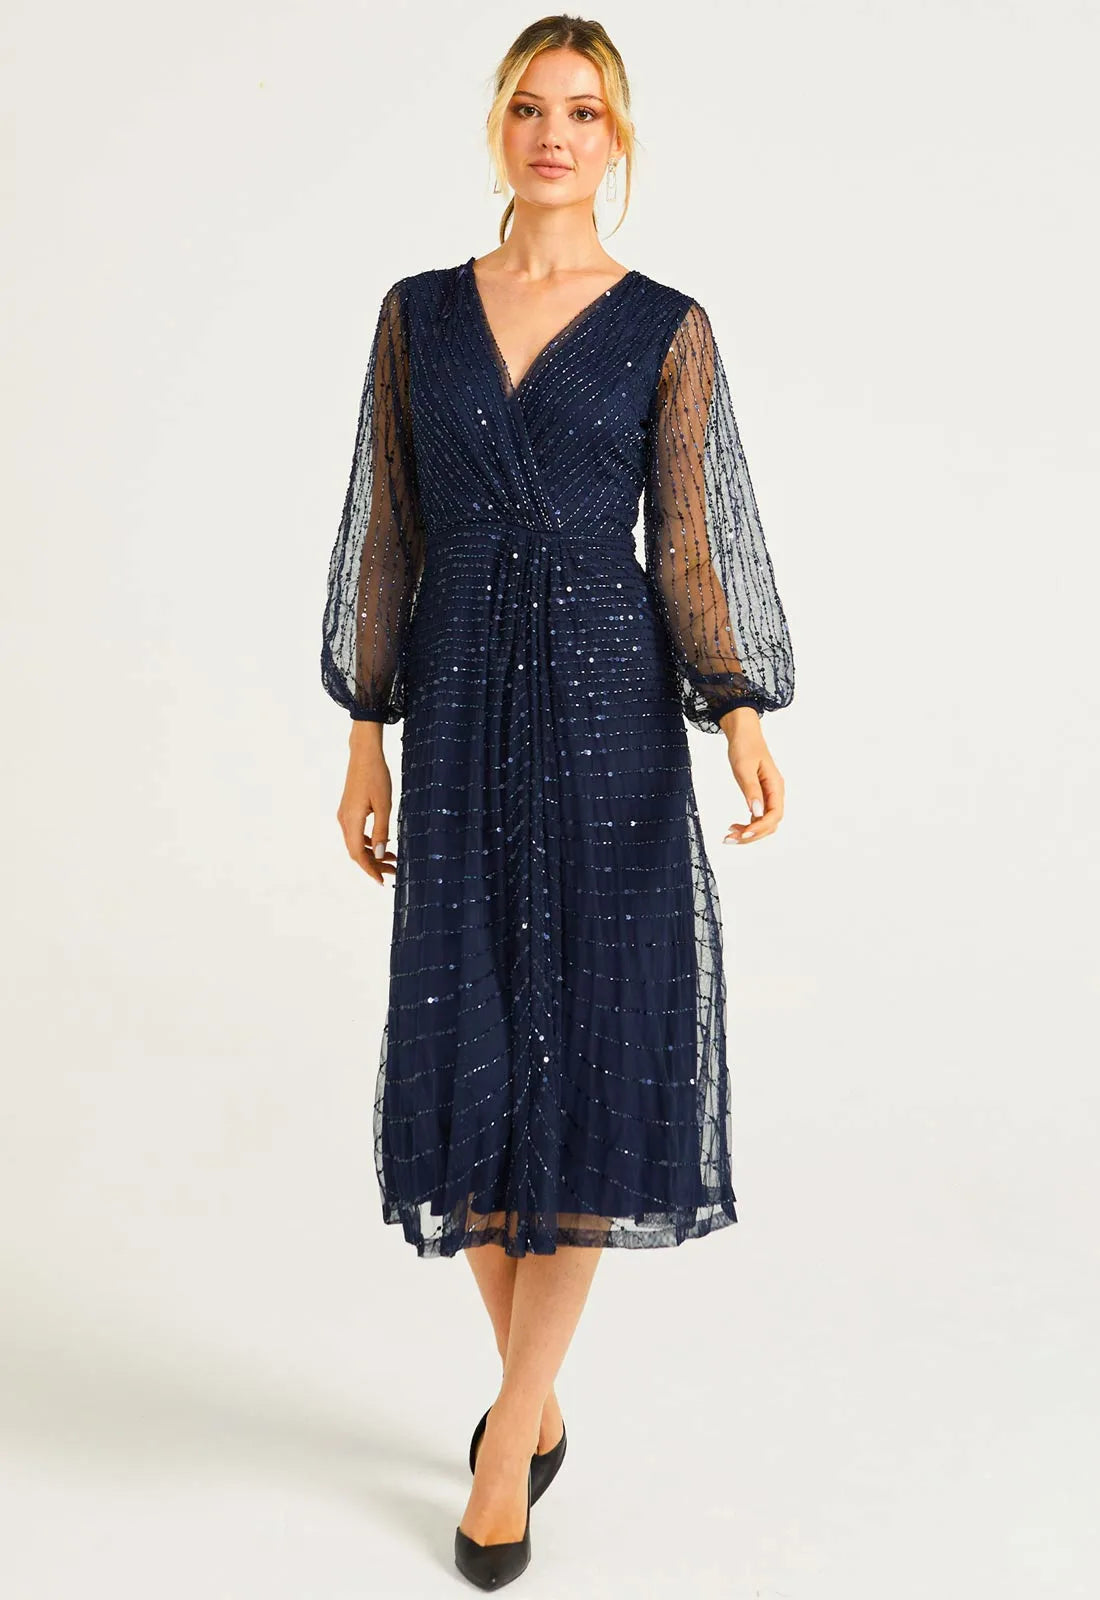 Navy Cocktail dress with sheer sleeves by Angeleye